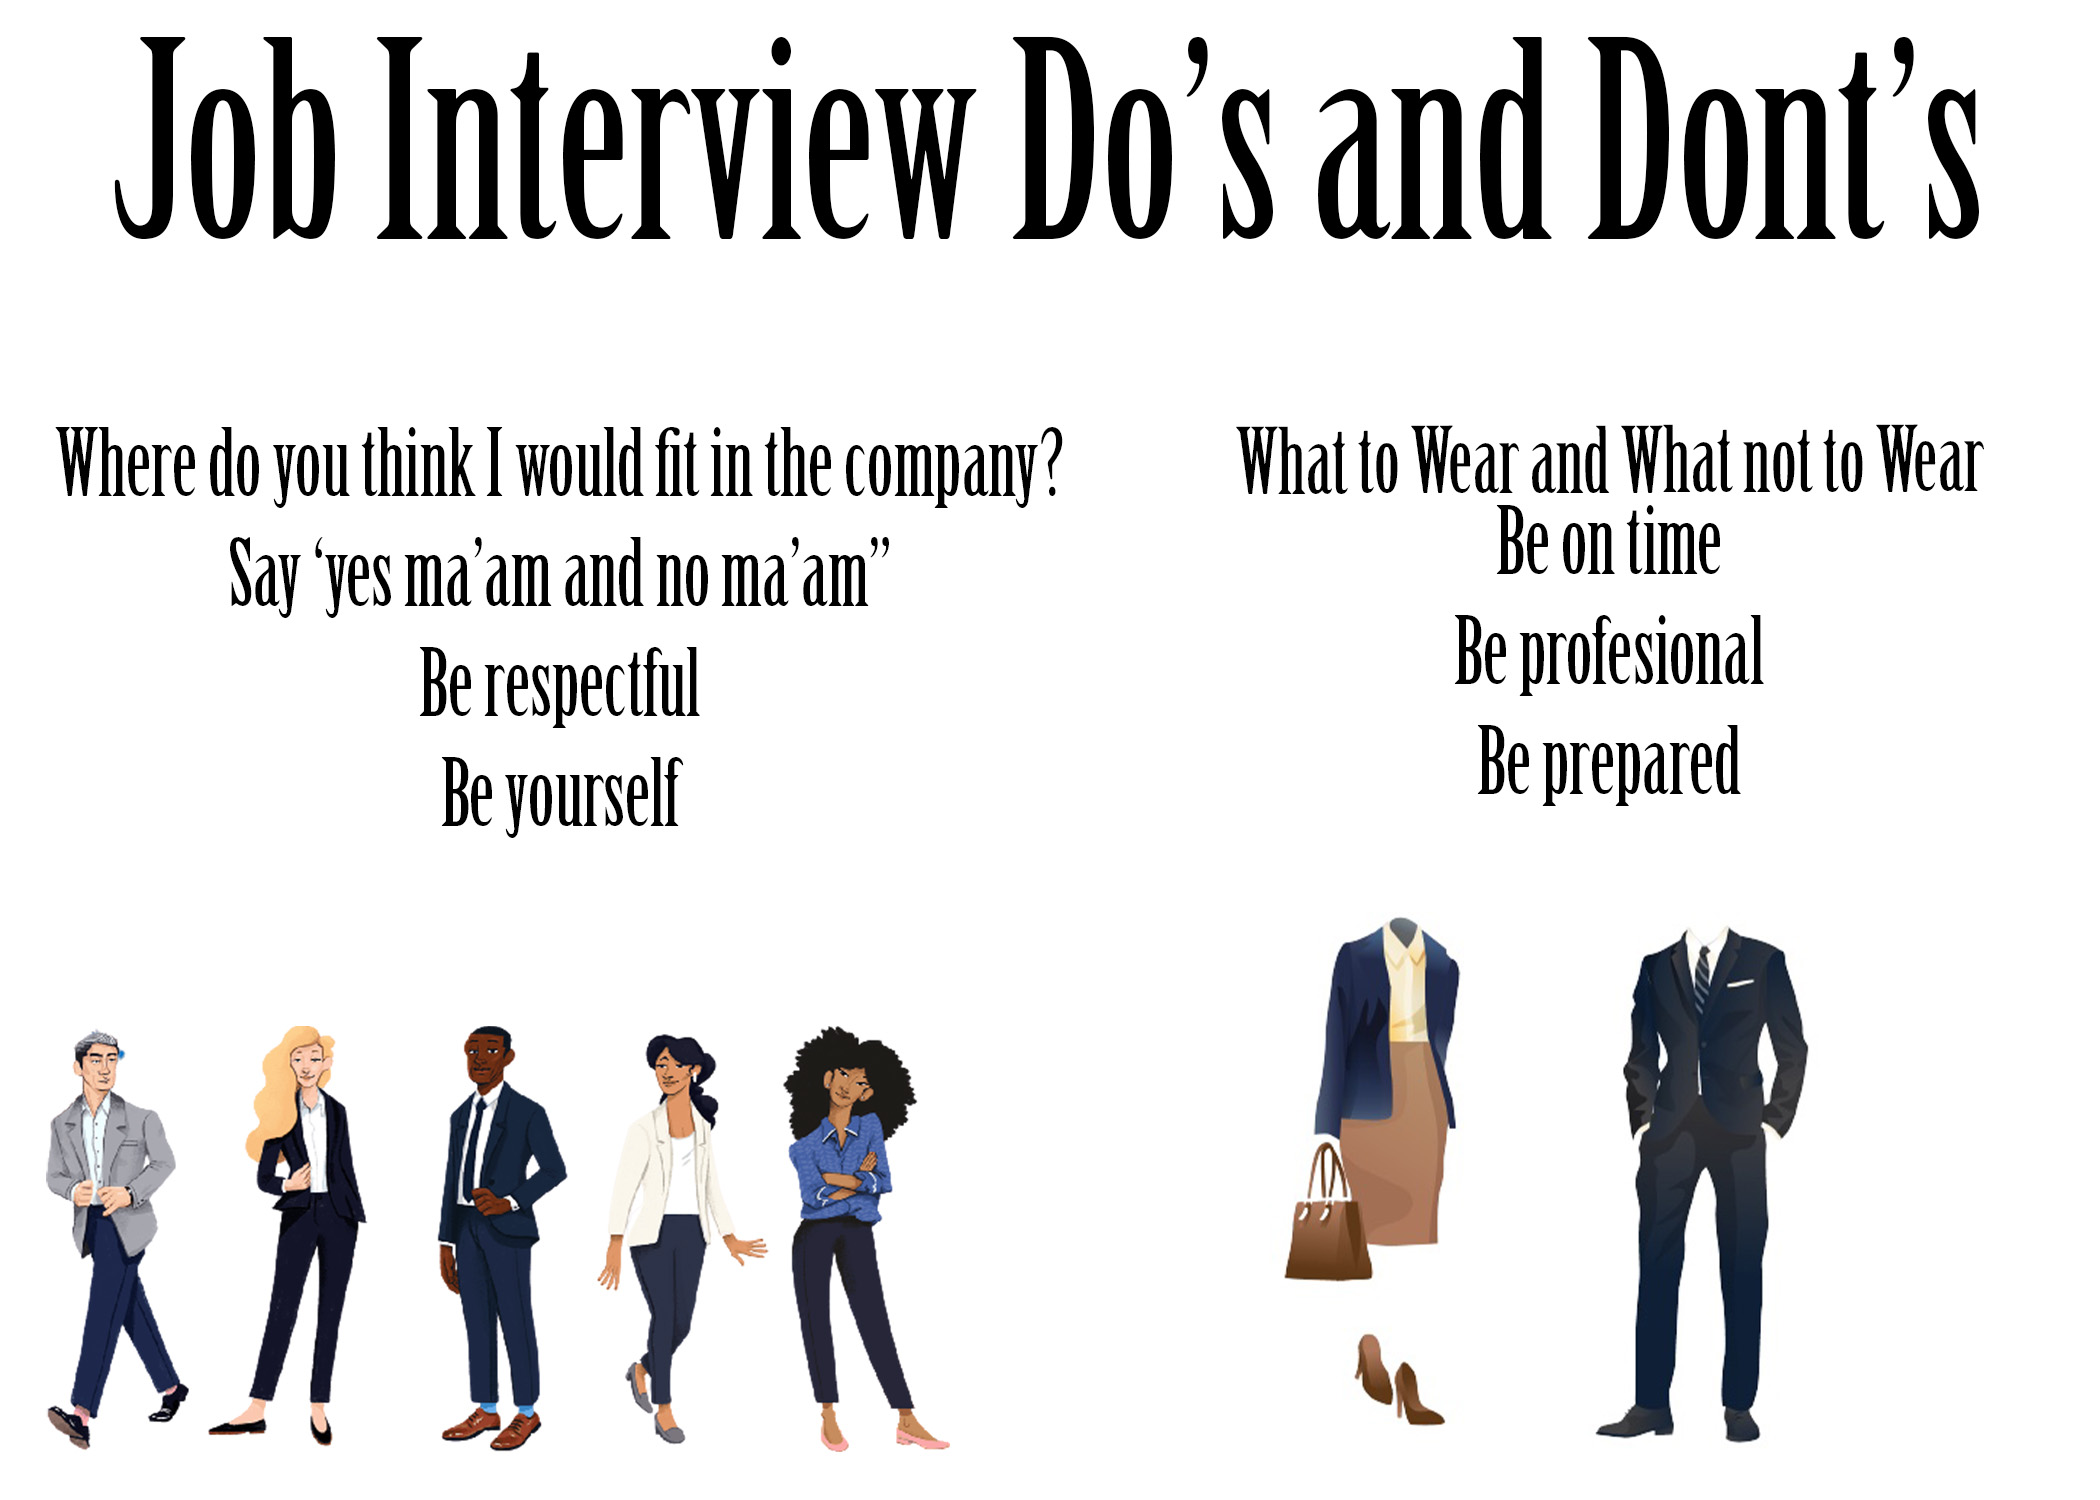 What to NOT Tell About Yourself During a Job Interview